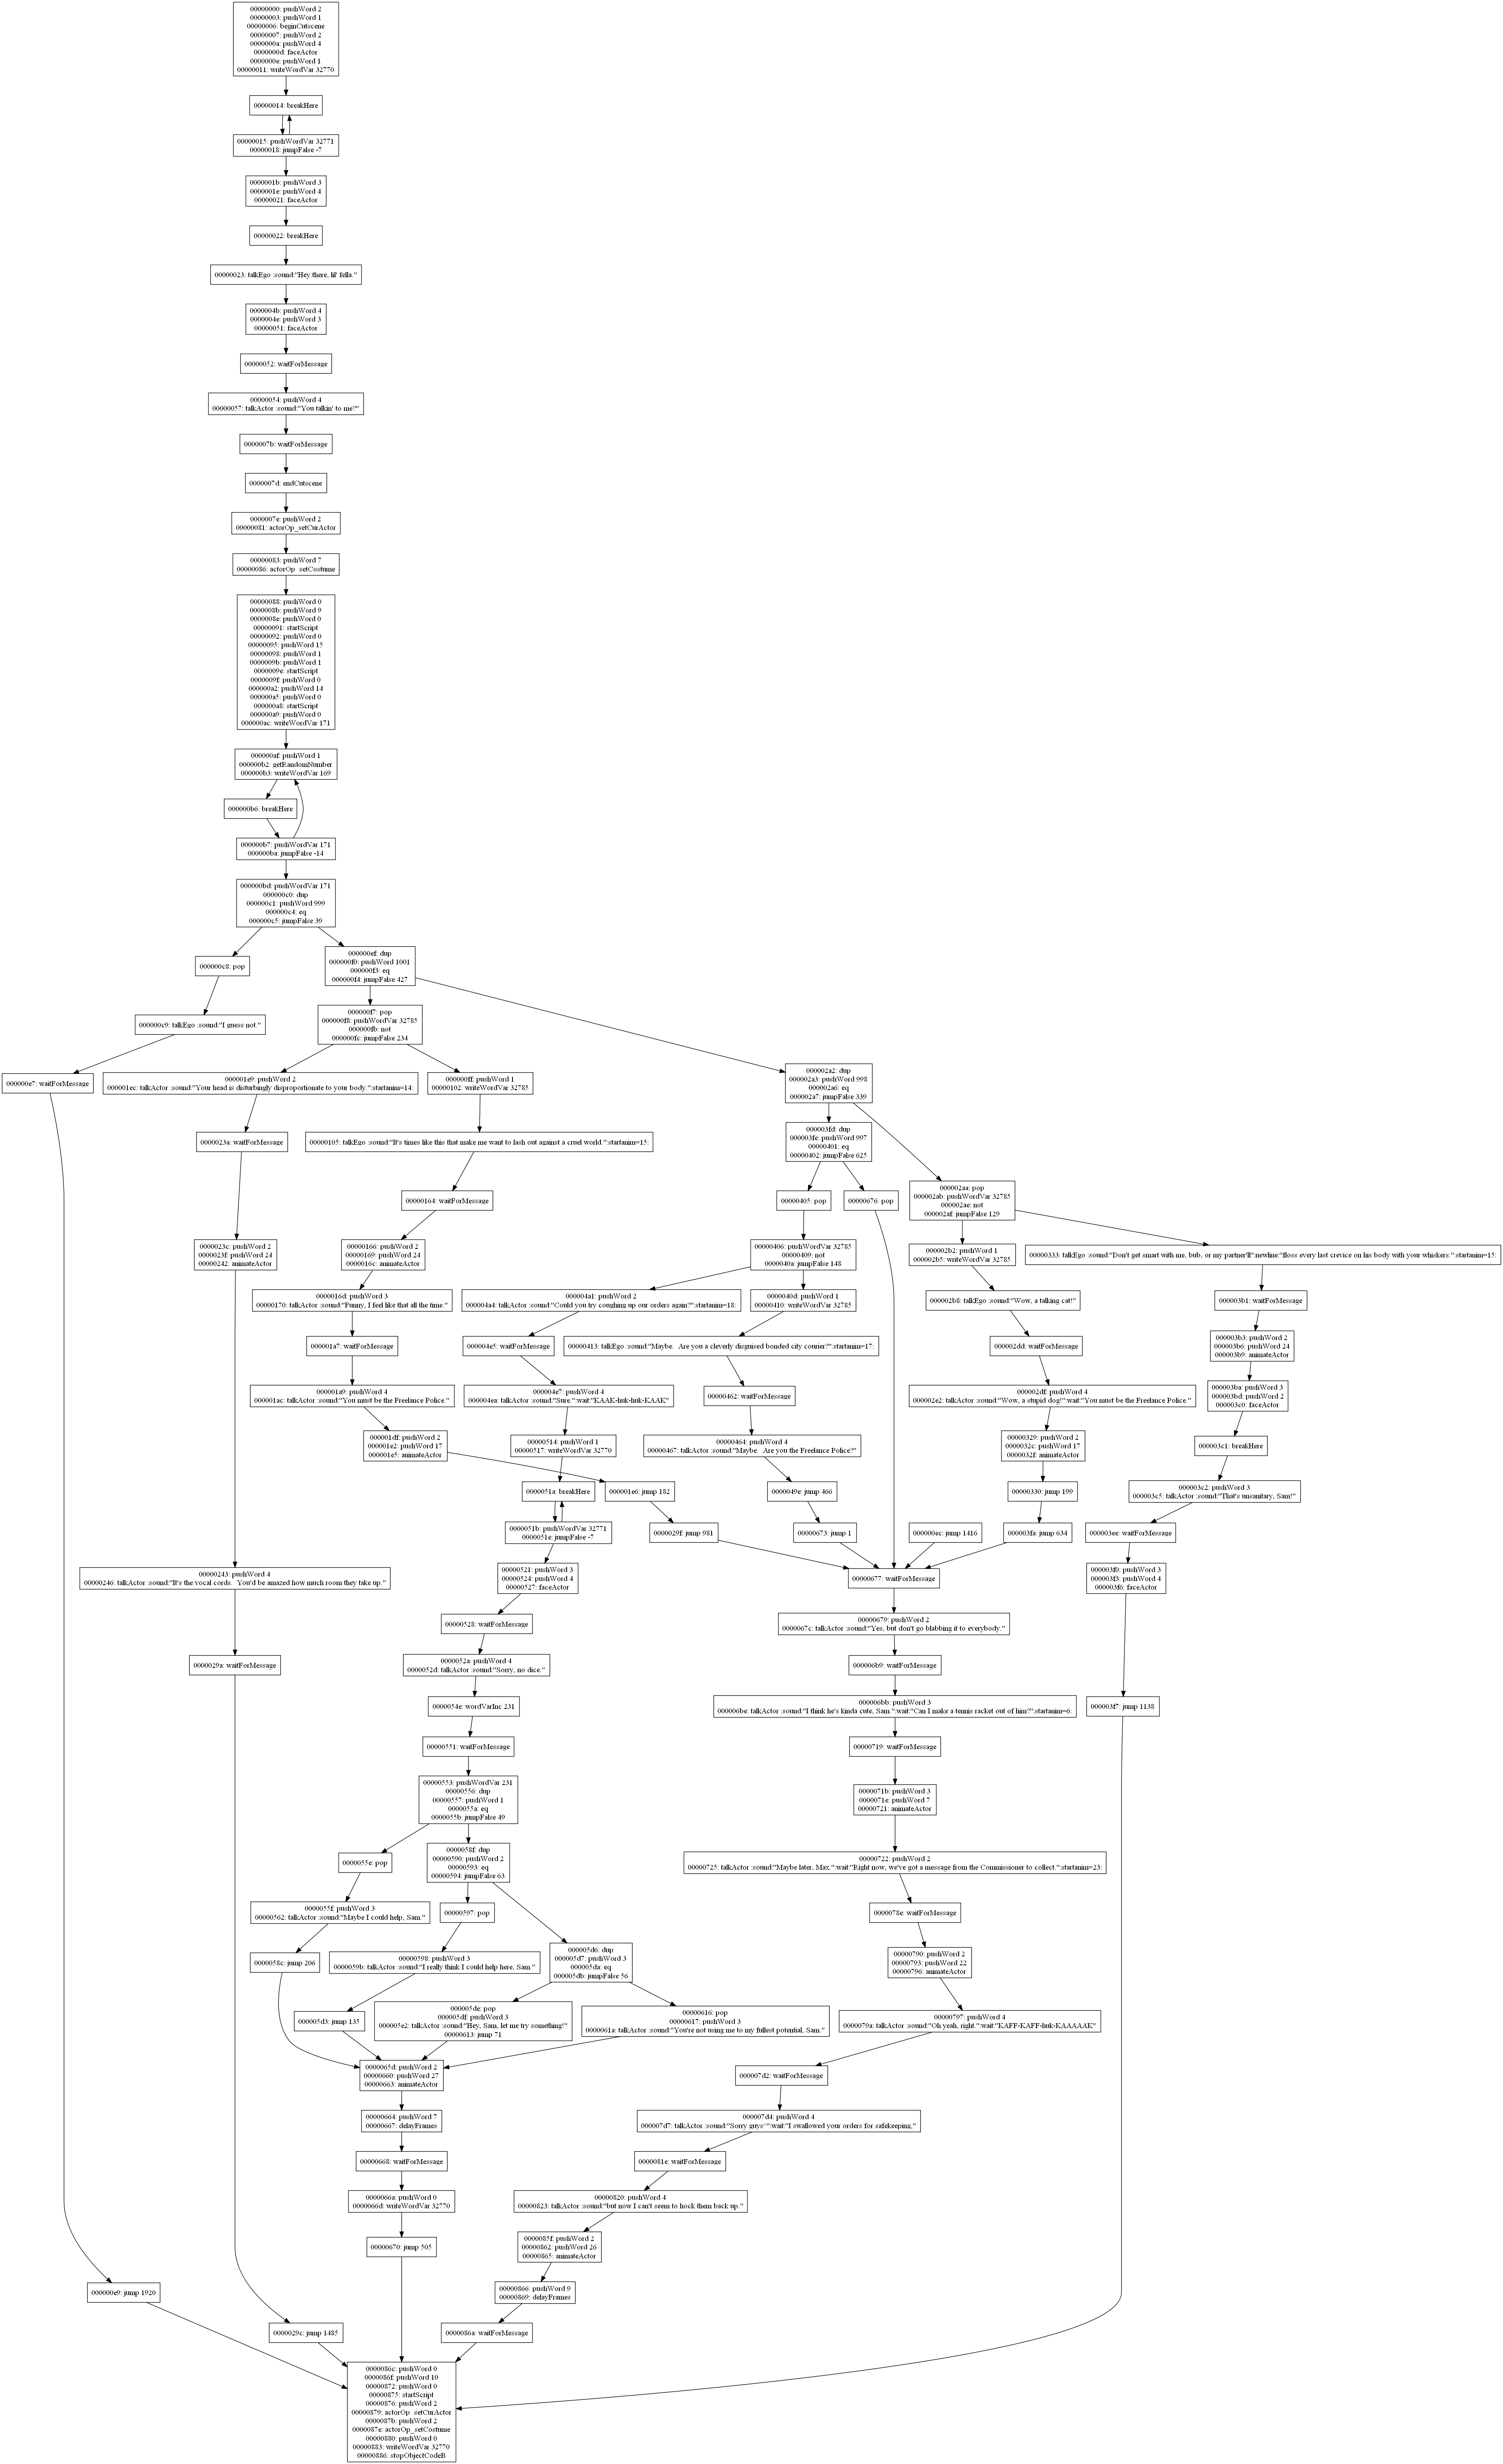 Grouped code flow graph for samnmax/room-9-202.dmp